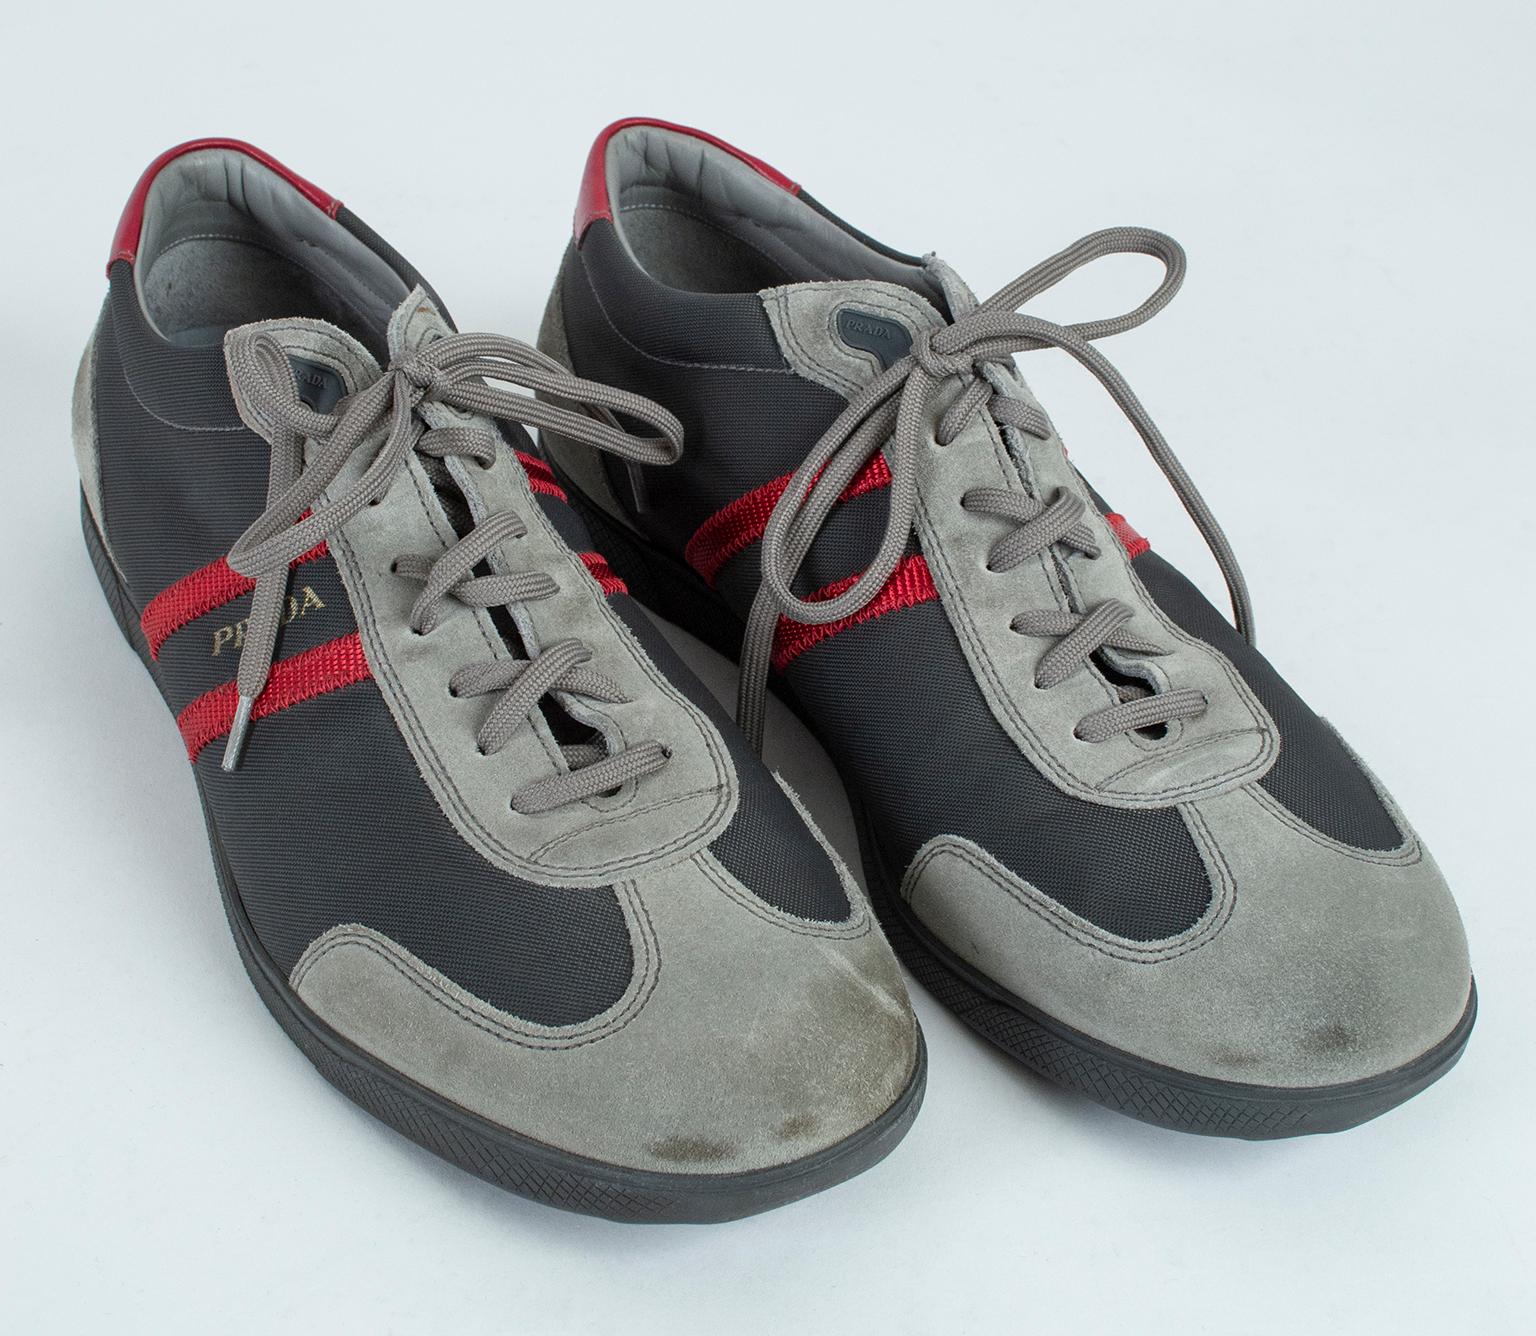 The ultimate in casual luxury, these low top sneakers offer comfort, practicality and loads of style. Sturdy but lightweight, their retro styling and color scheme make them the perfect weekend shoe.

Gray suede low top sneakers with canvas inset and